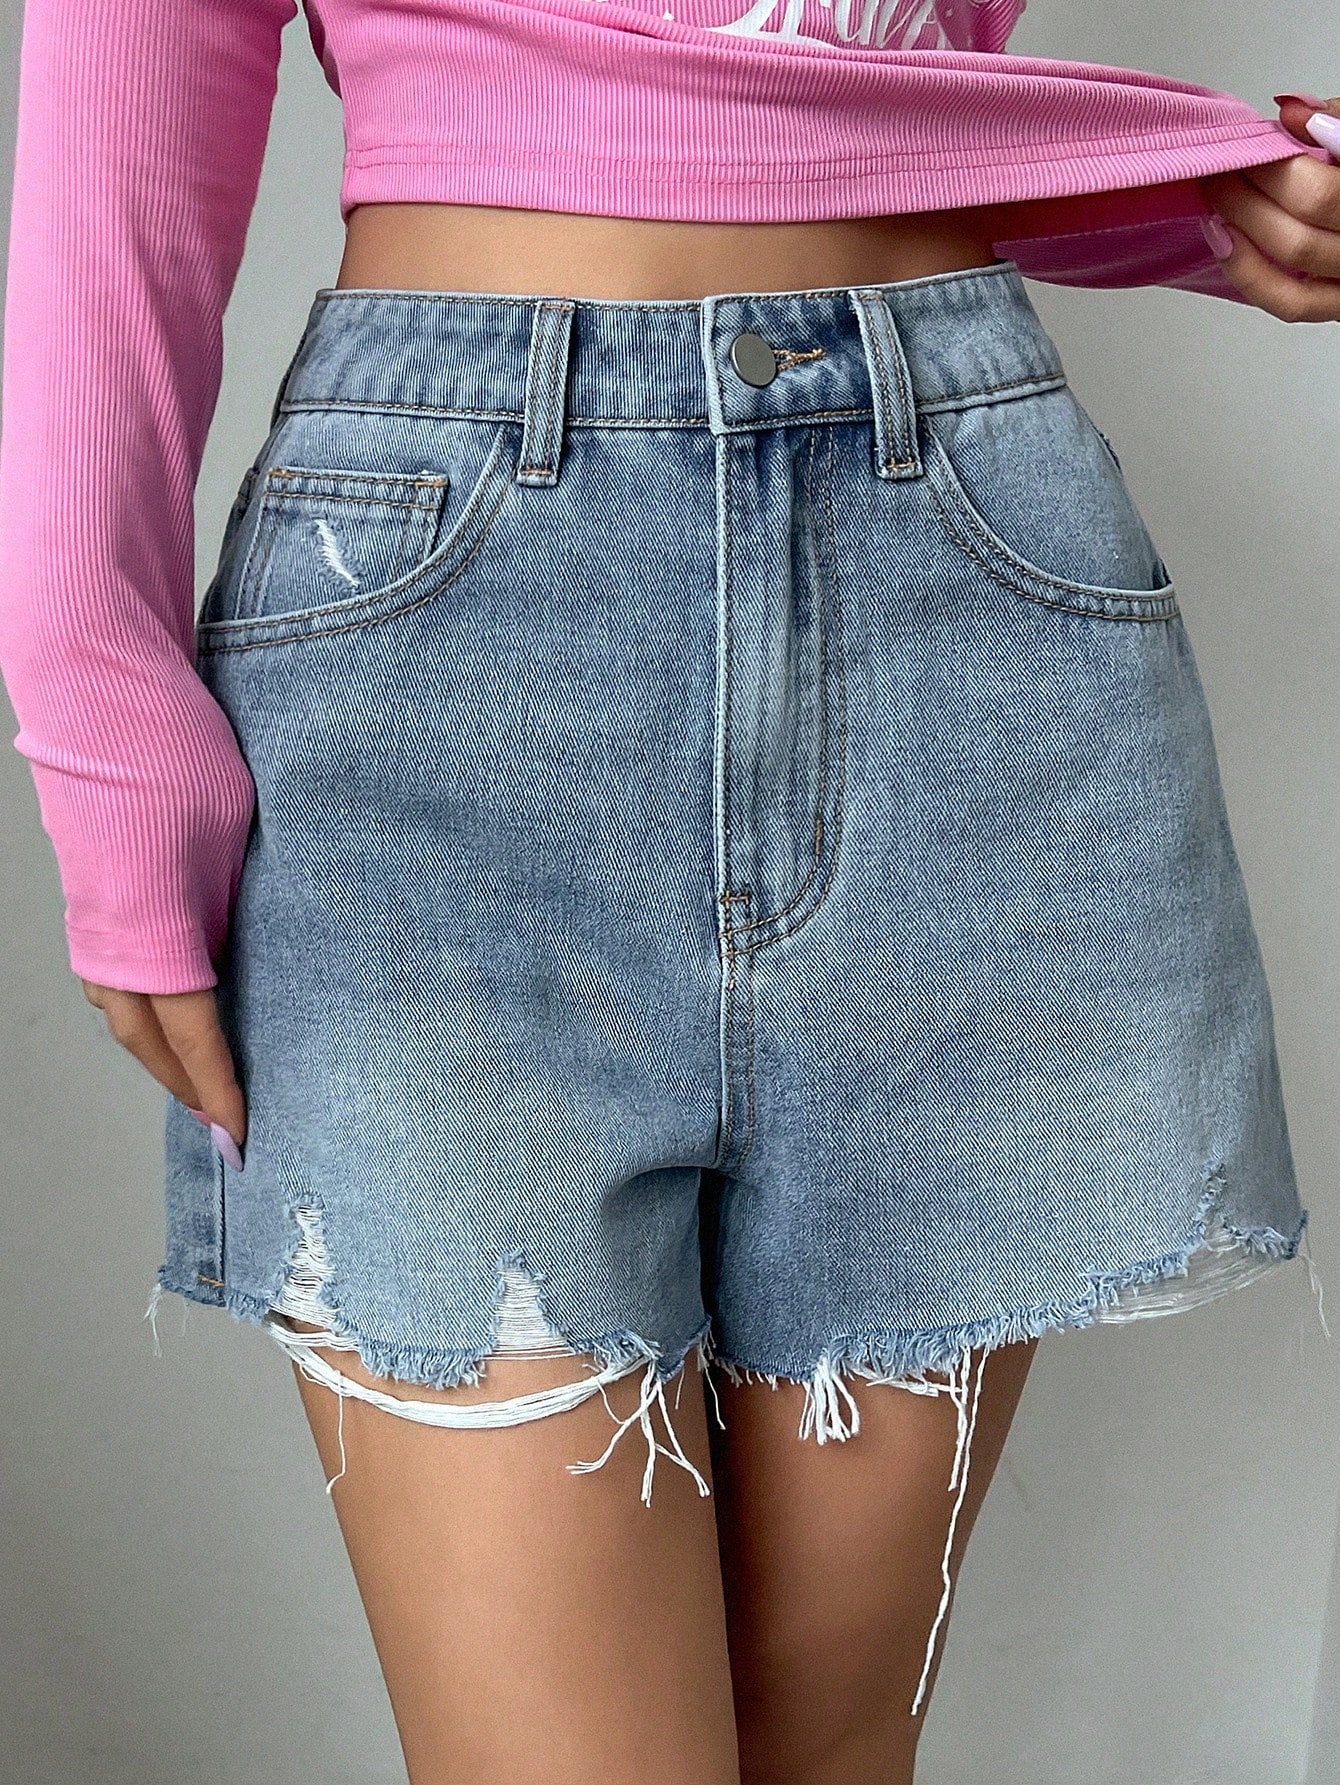 Women Casual Denim Shorts With Pockets And Frayed Hem